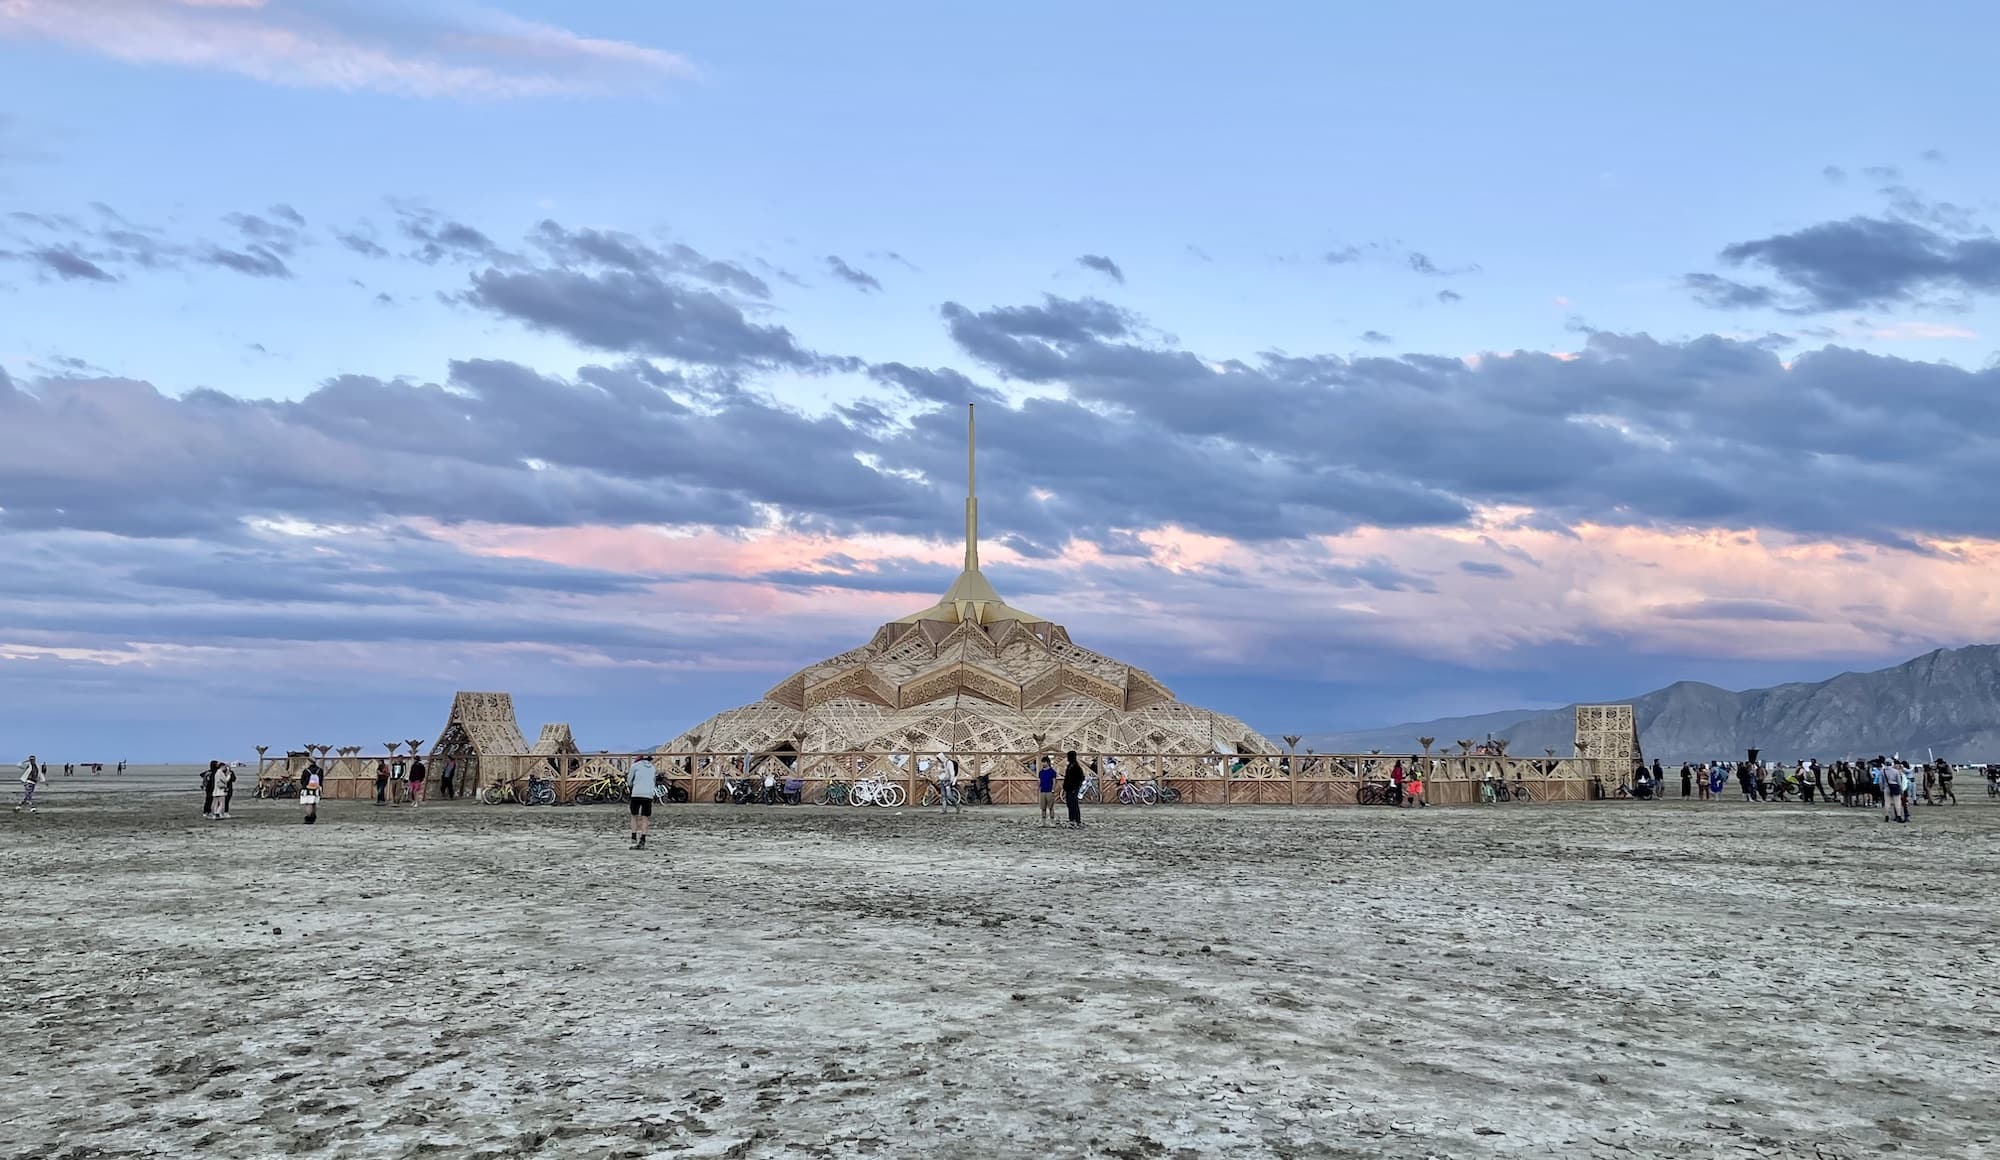 A temple in the desert at Burning Man